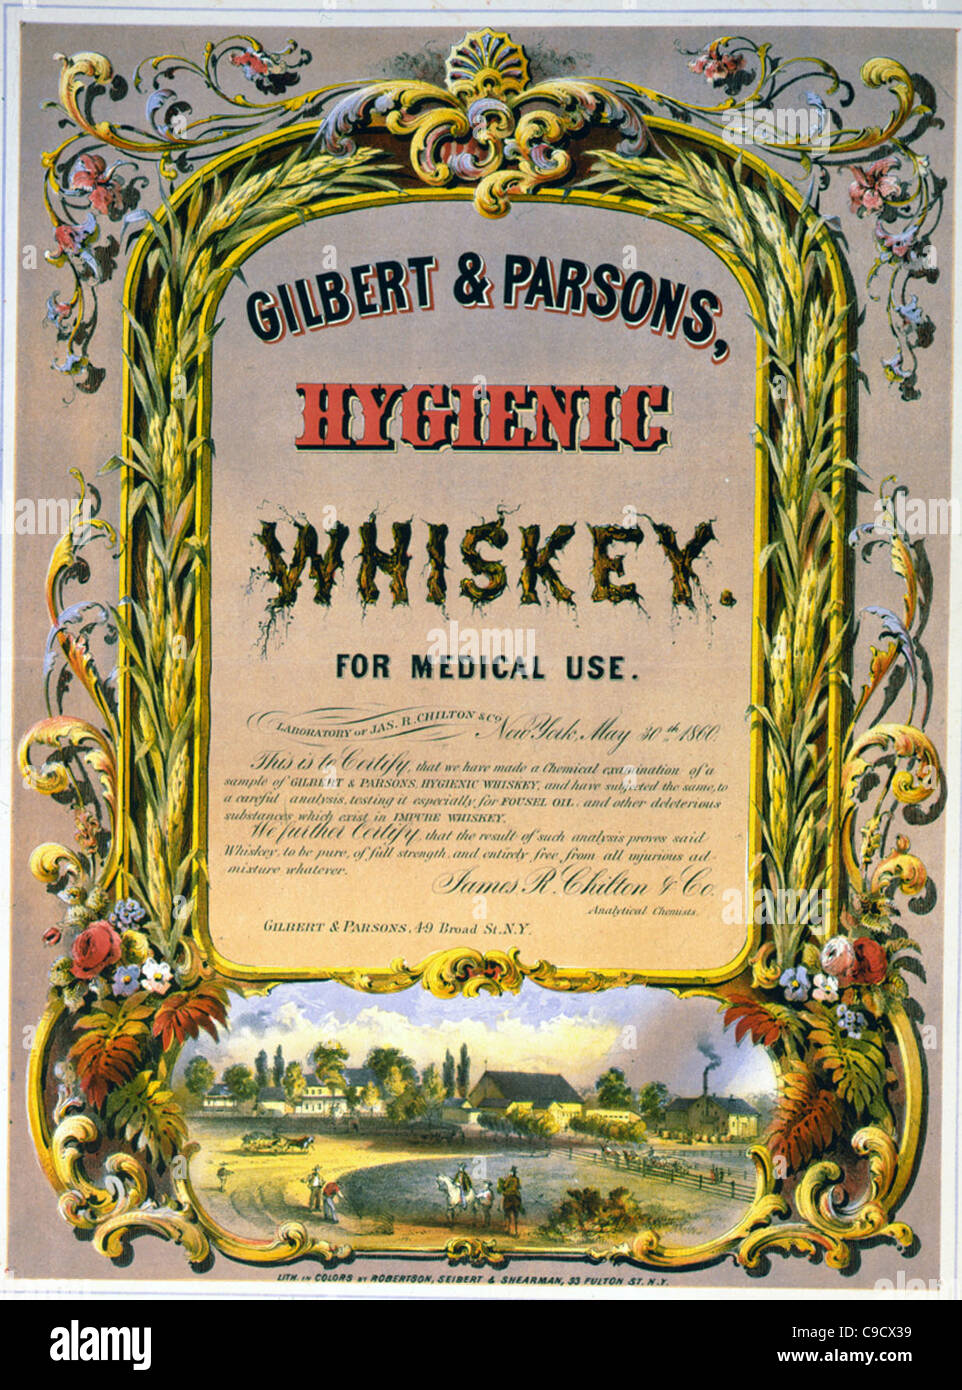 Gilbert & Parsons, hygienic whiskey for medical use Advertisement with ornate border, farm scene, and distillery, circa 1860 Stock Photo